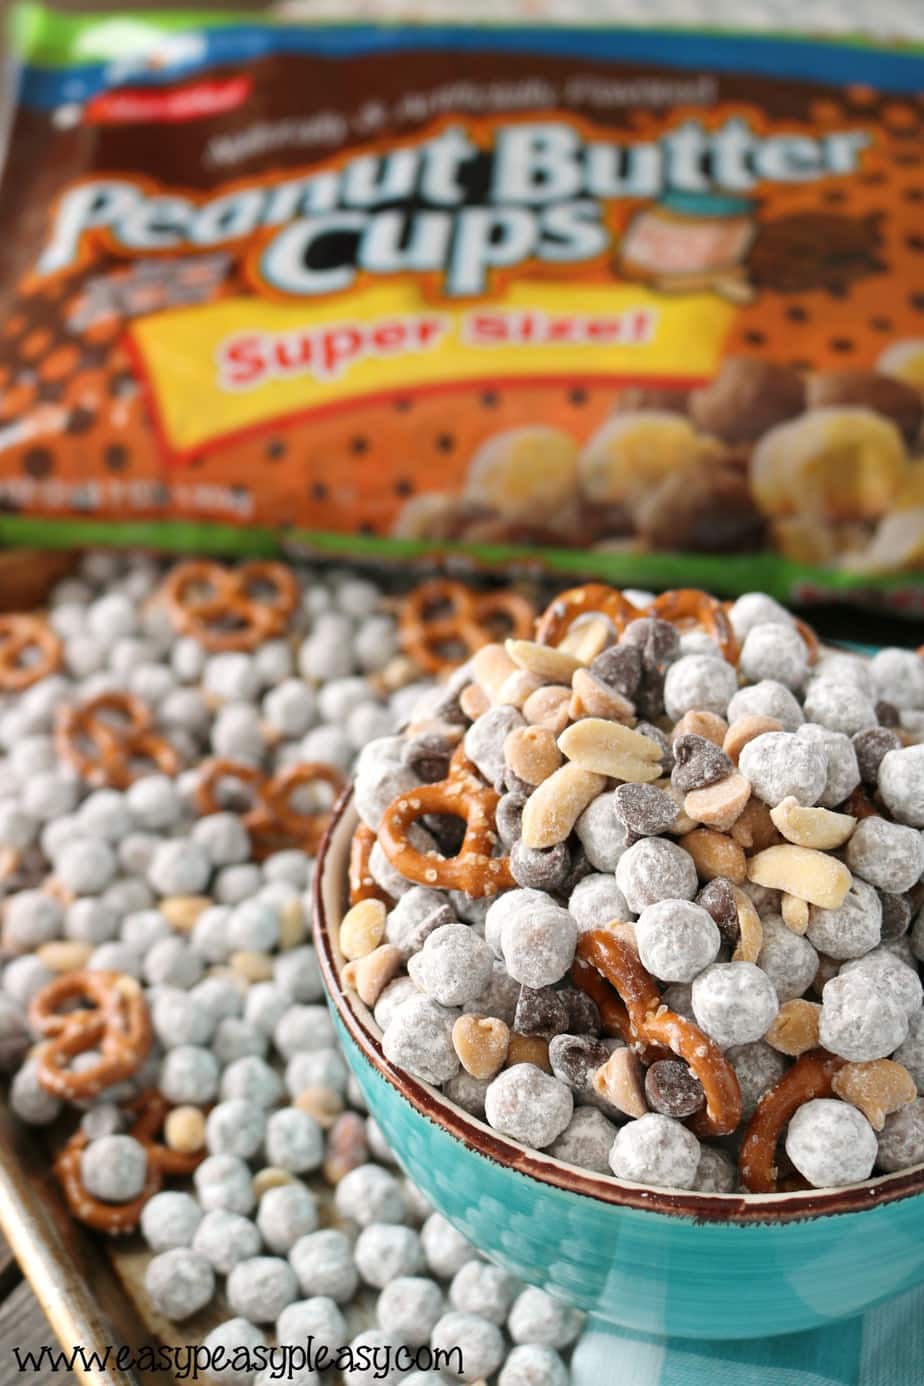 Malt O Meal Peanut Butter Cups Cereal Snack Mix at easypeasypleasy.com (ad)